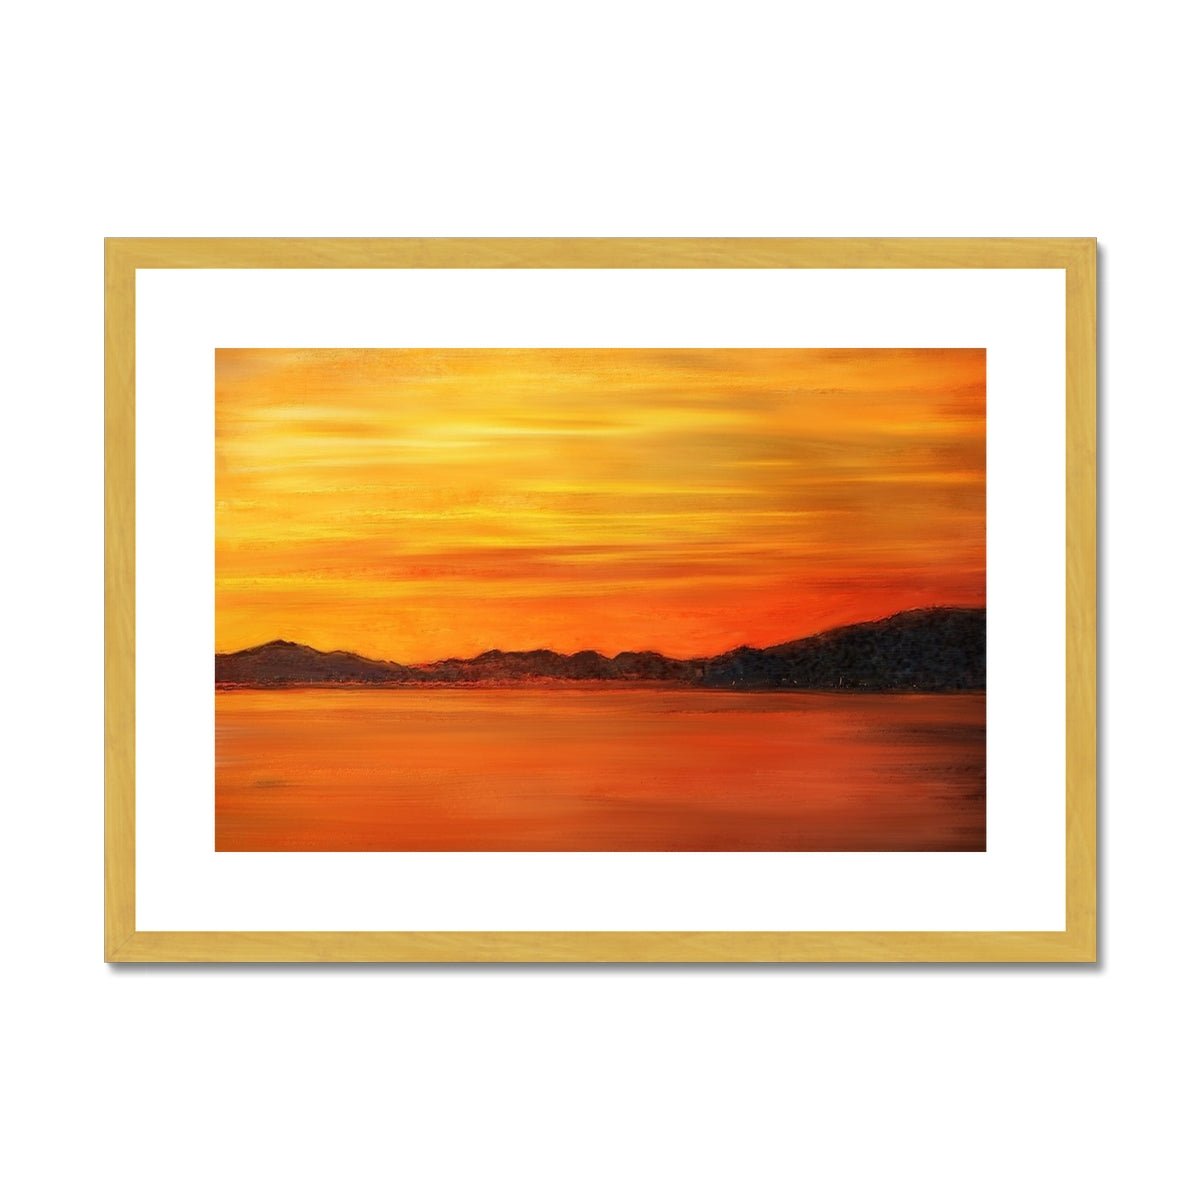 Loch Fyne Sunset Painting | Antique Framed & Mounted Prints From Scotland-Antique Framed & Mounted Prints-Scottish Lochs & Mountains Art Gallery-A2 Landscape-Gold Frame-Paintings, Prints, Homeware, Art Gifts From Scotland By Scottish Artist Kevin Hunter